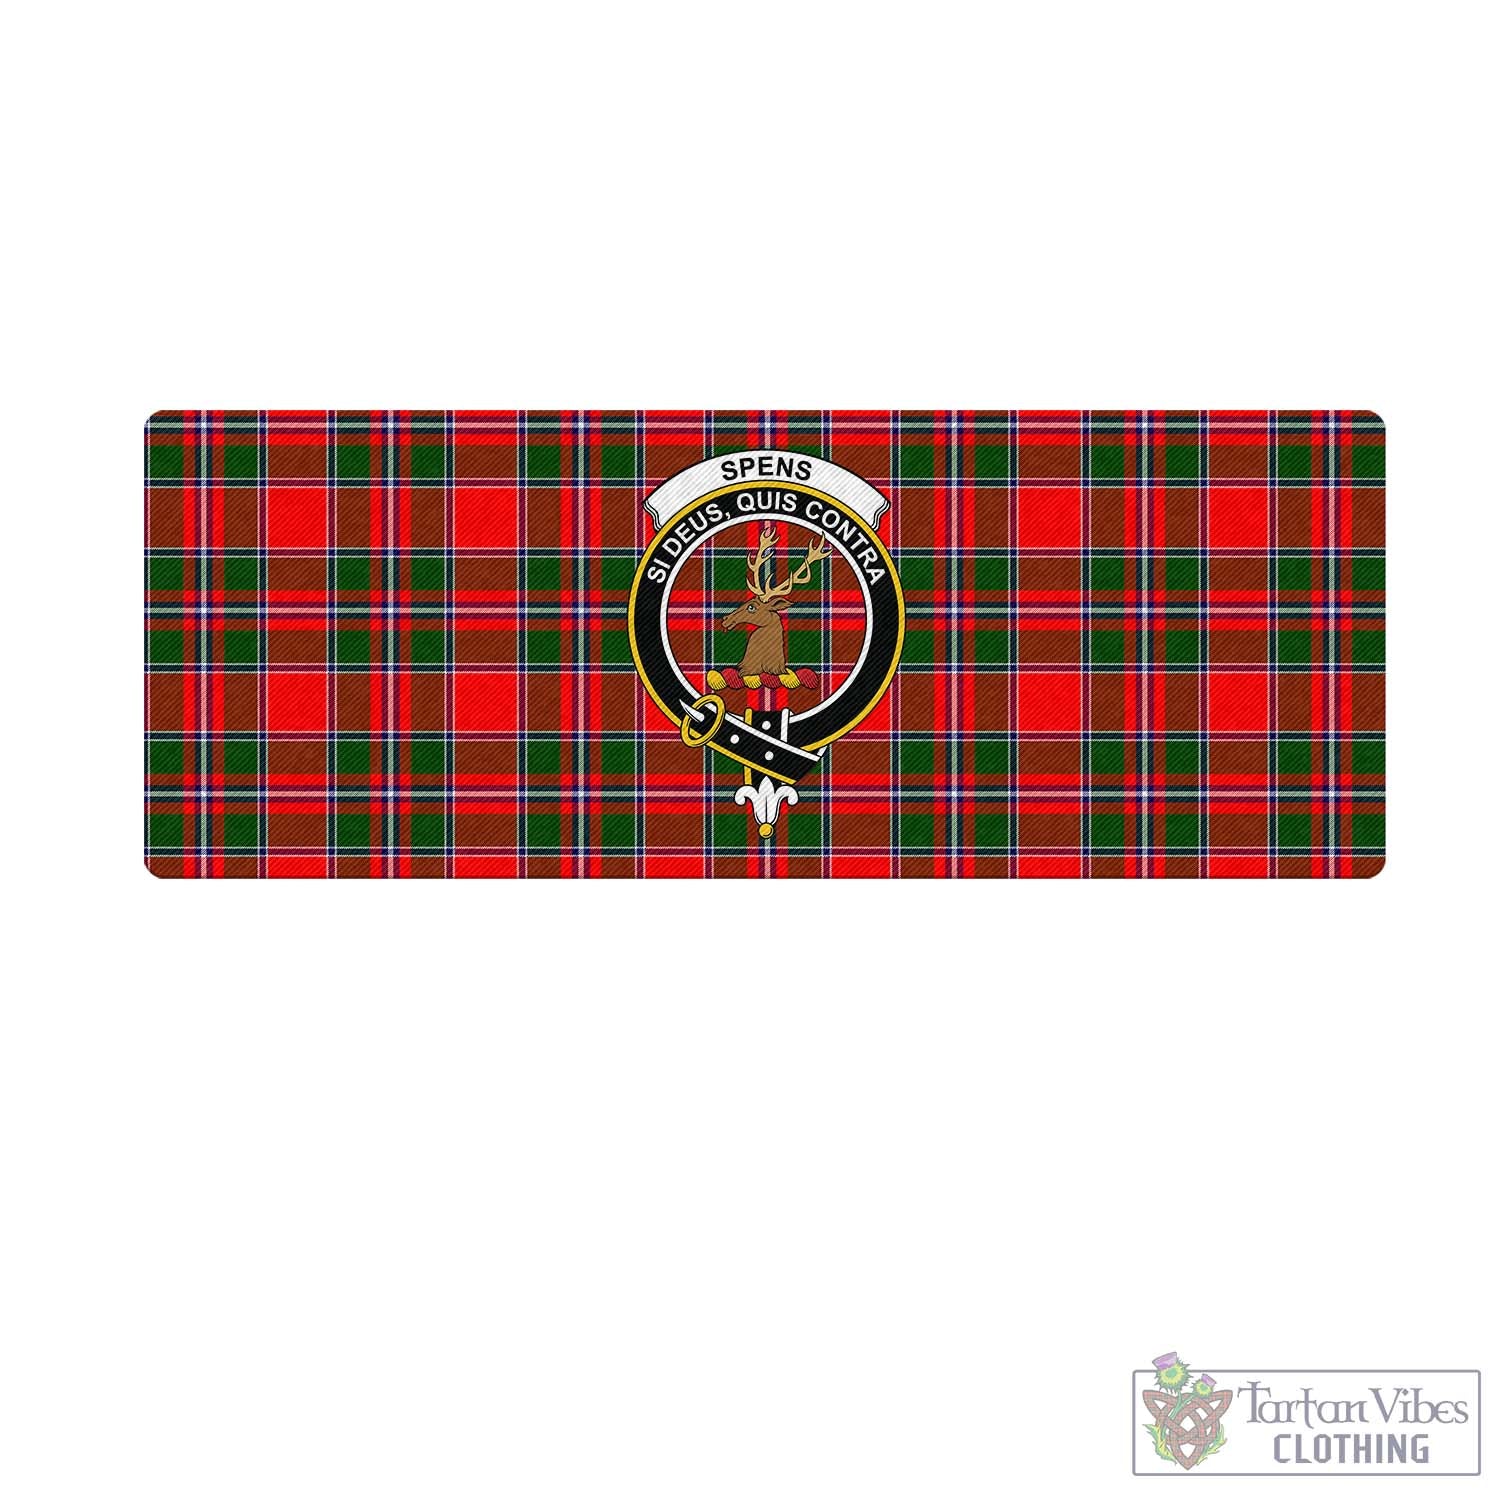 Tartan Vibes Clothing Spens Modern Tartan Mouse Pad with Family Crest